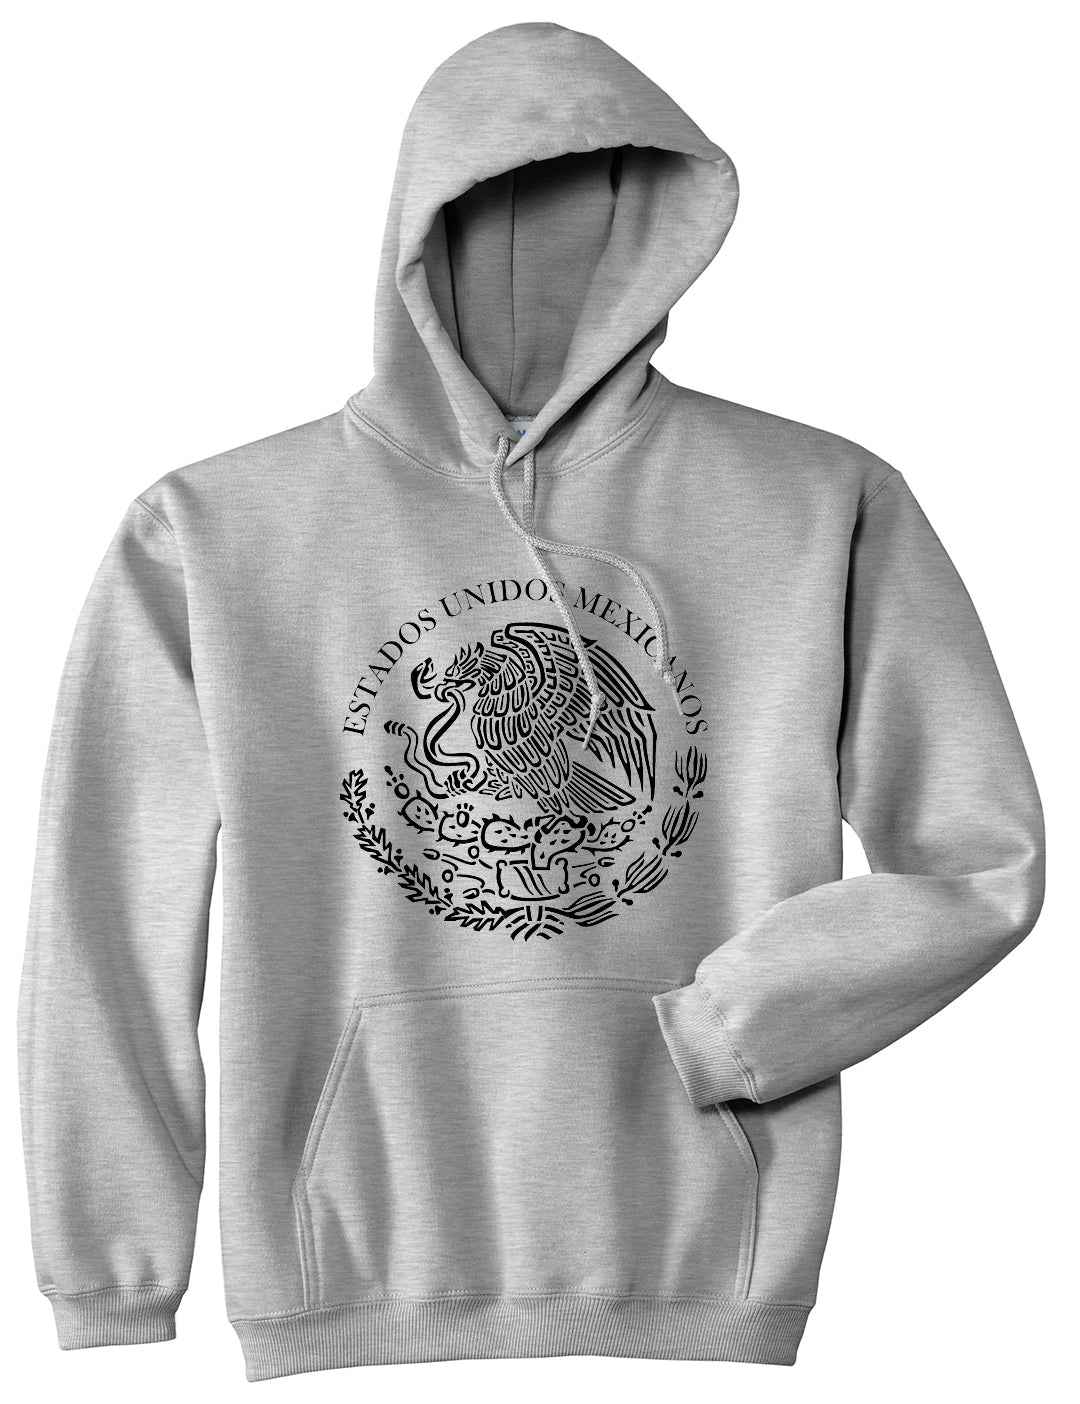 Mexico Coat Of Arms Black White Mens Pullover Hoodie Grey